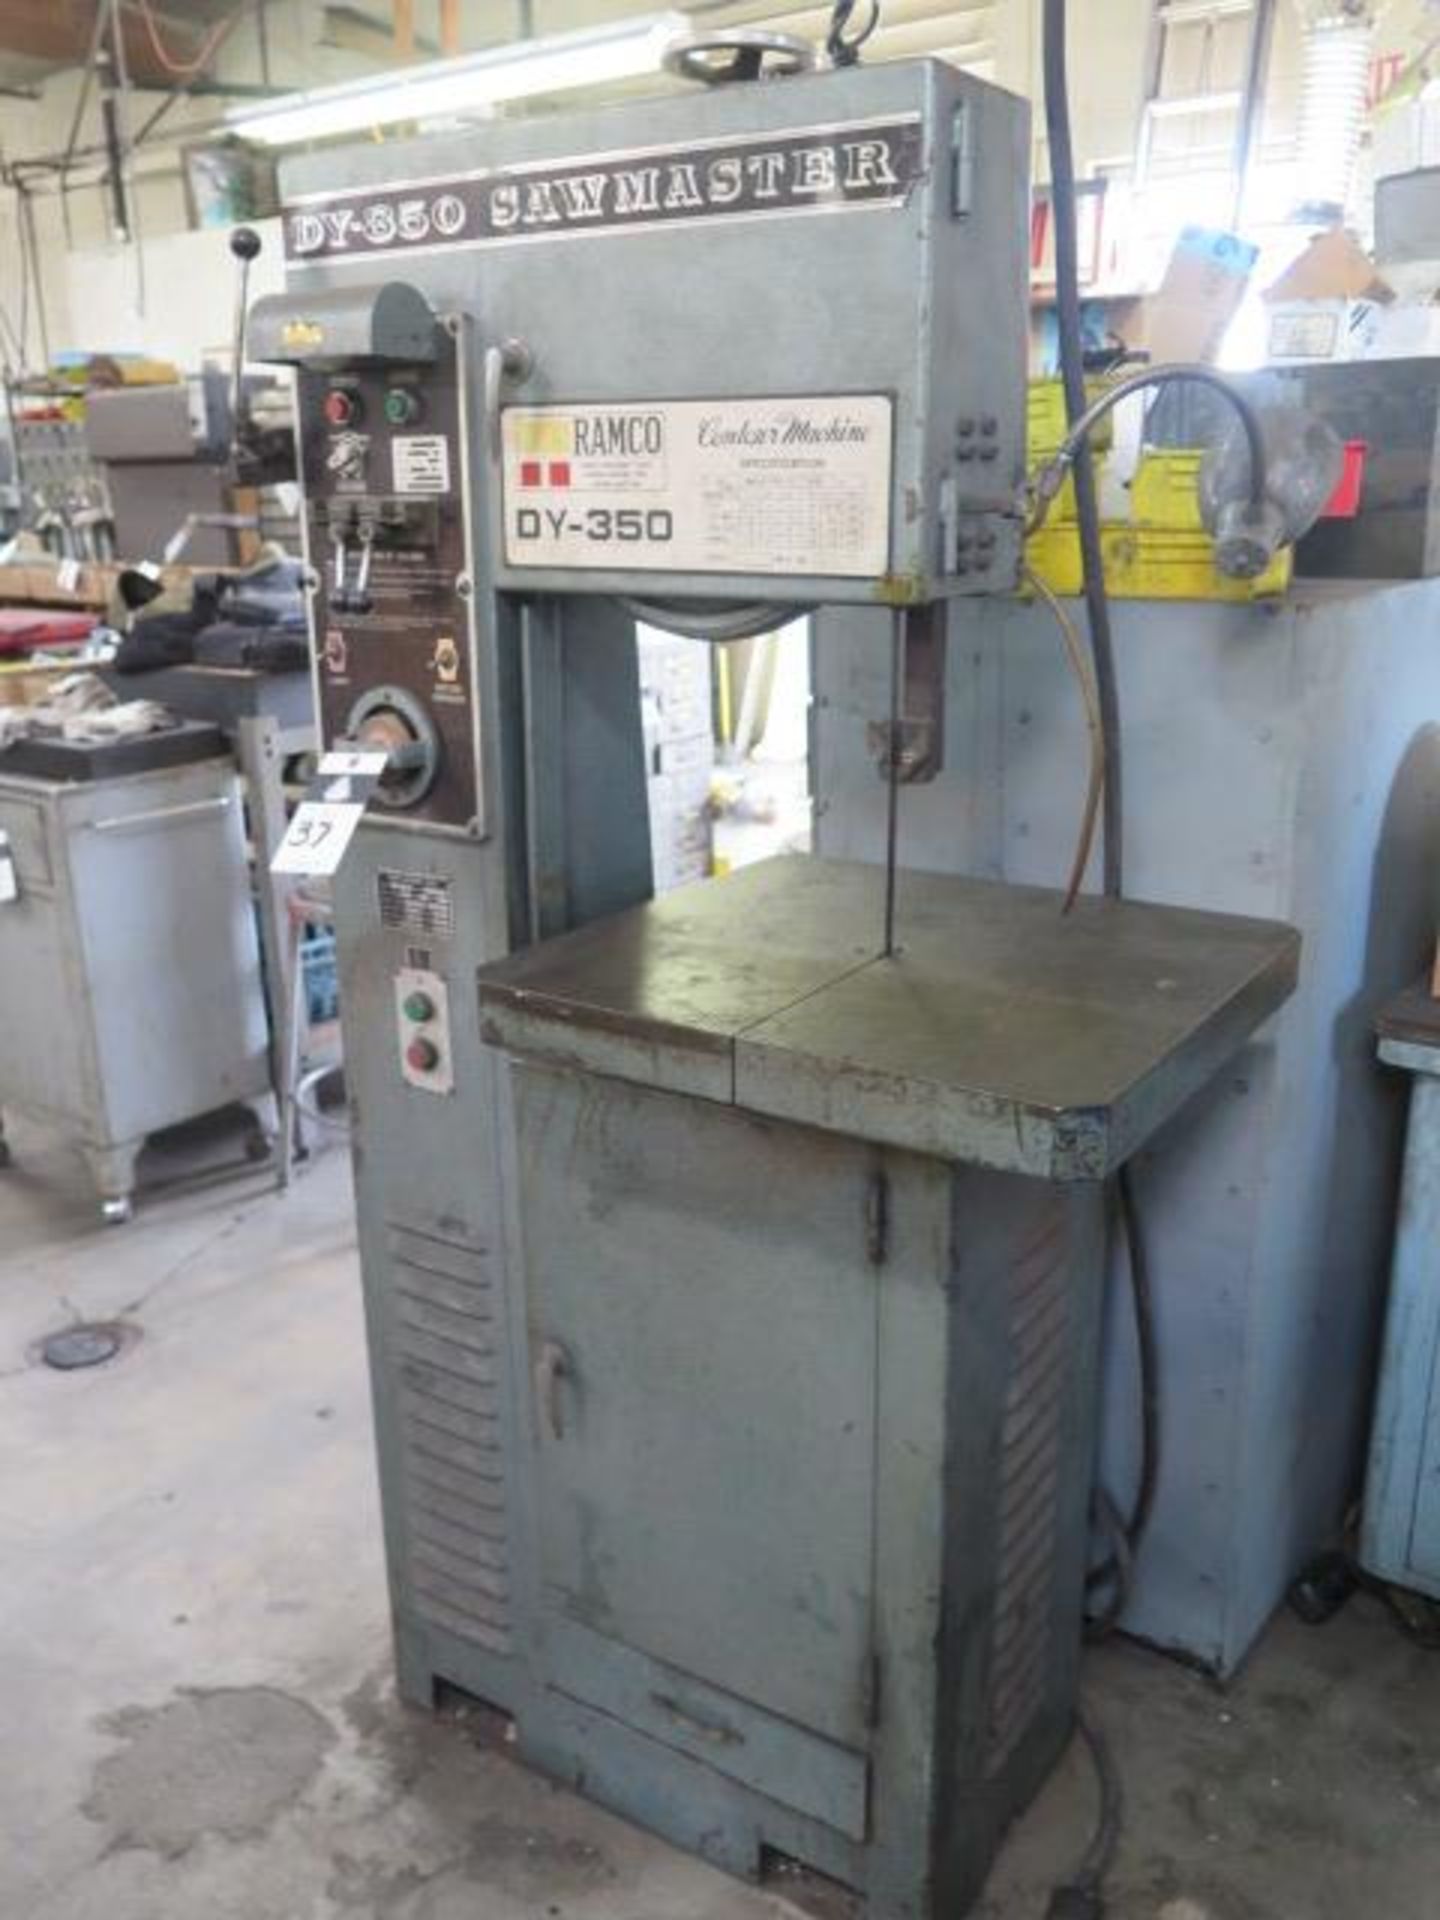 Ramco SawMaster DY-350 14" Vertical Band Saw s/n 885057 w/ Blade Welder, SOLD AS IS AND NO WARRANTY - Image 2 of 7